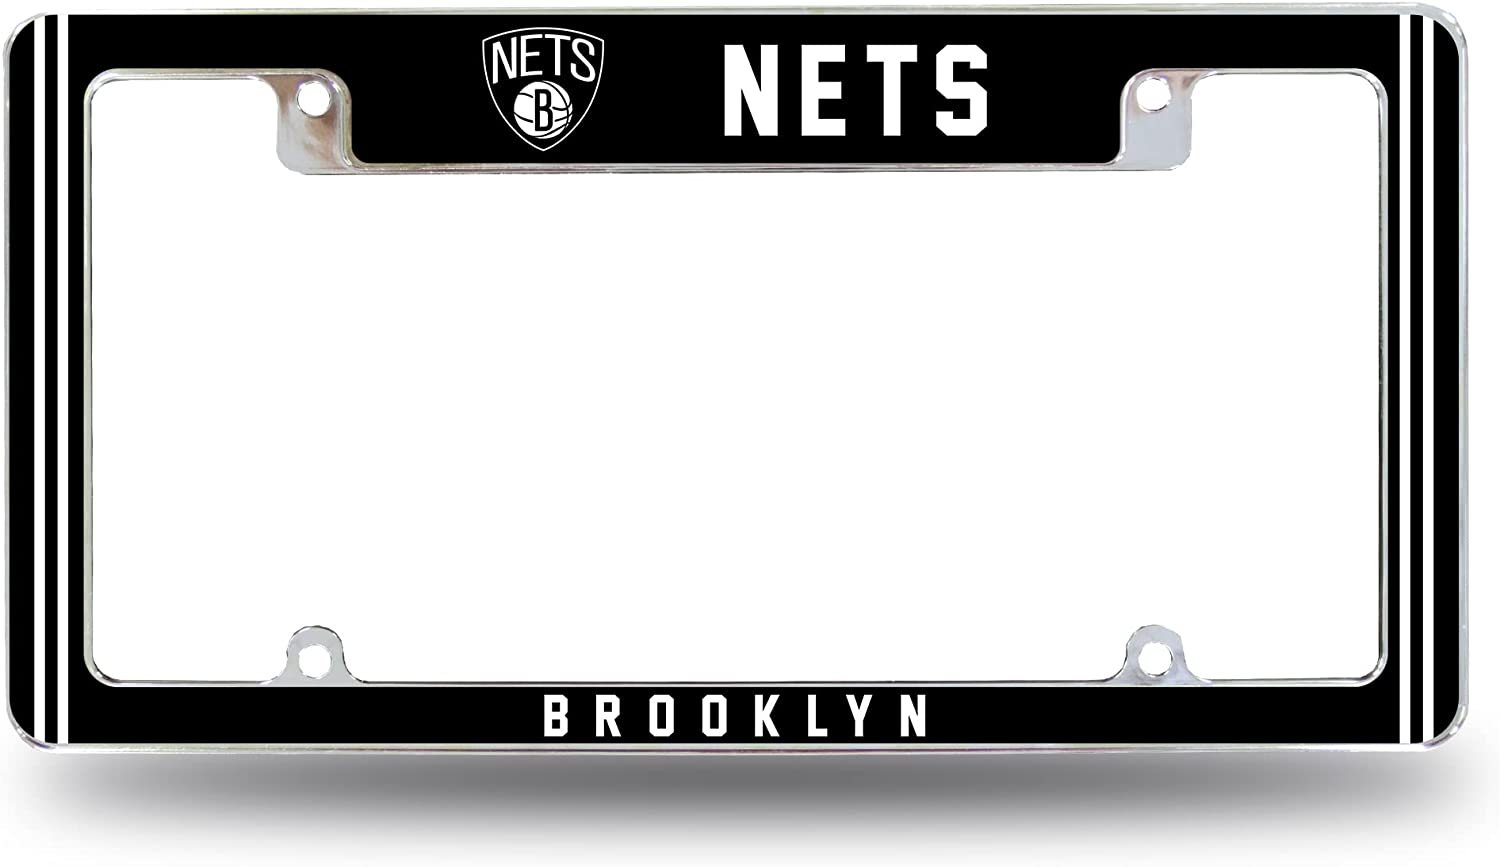 Brooklyn Nets Metal License Plate Frame Chrome Tag Cover Alternate Design 6x12 Inch